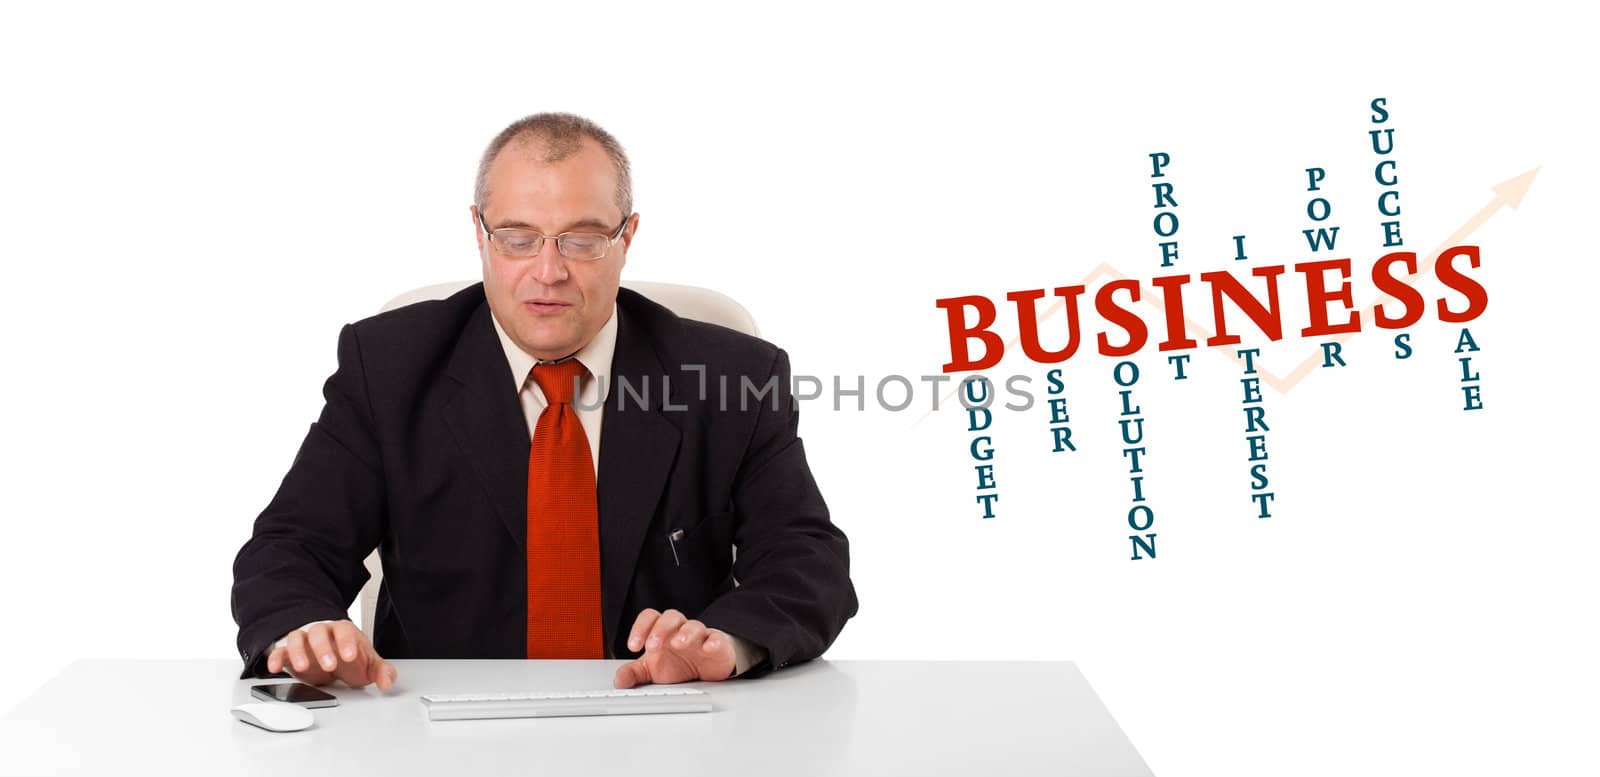 businessman sitting at desk and typing on keyboard with word cloud, isolated on white